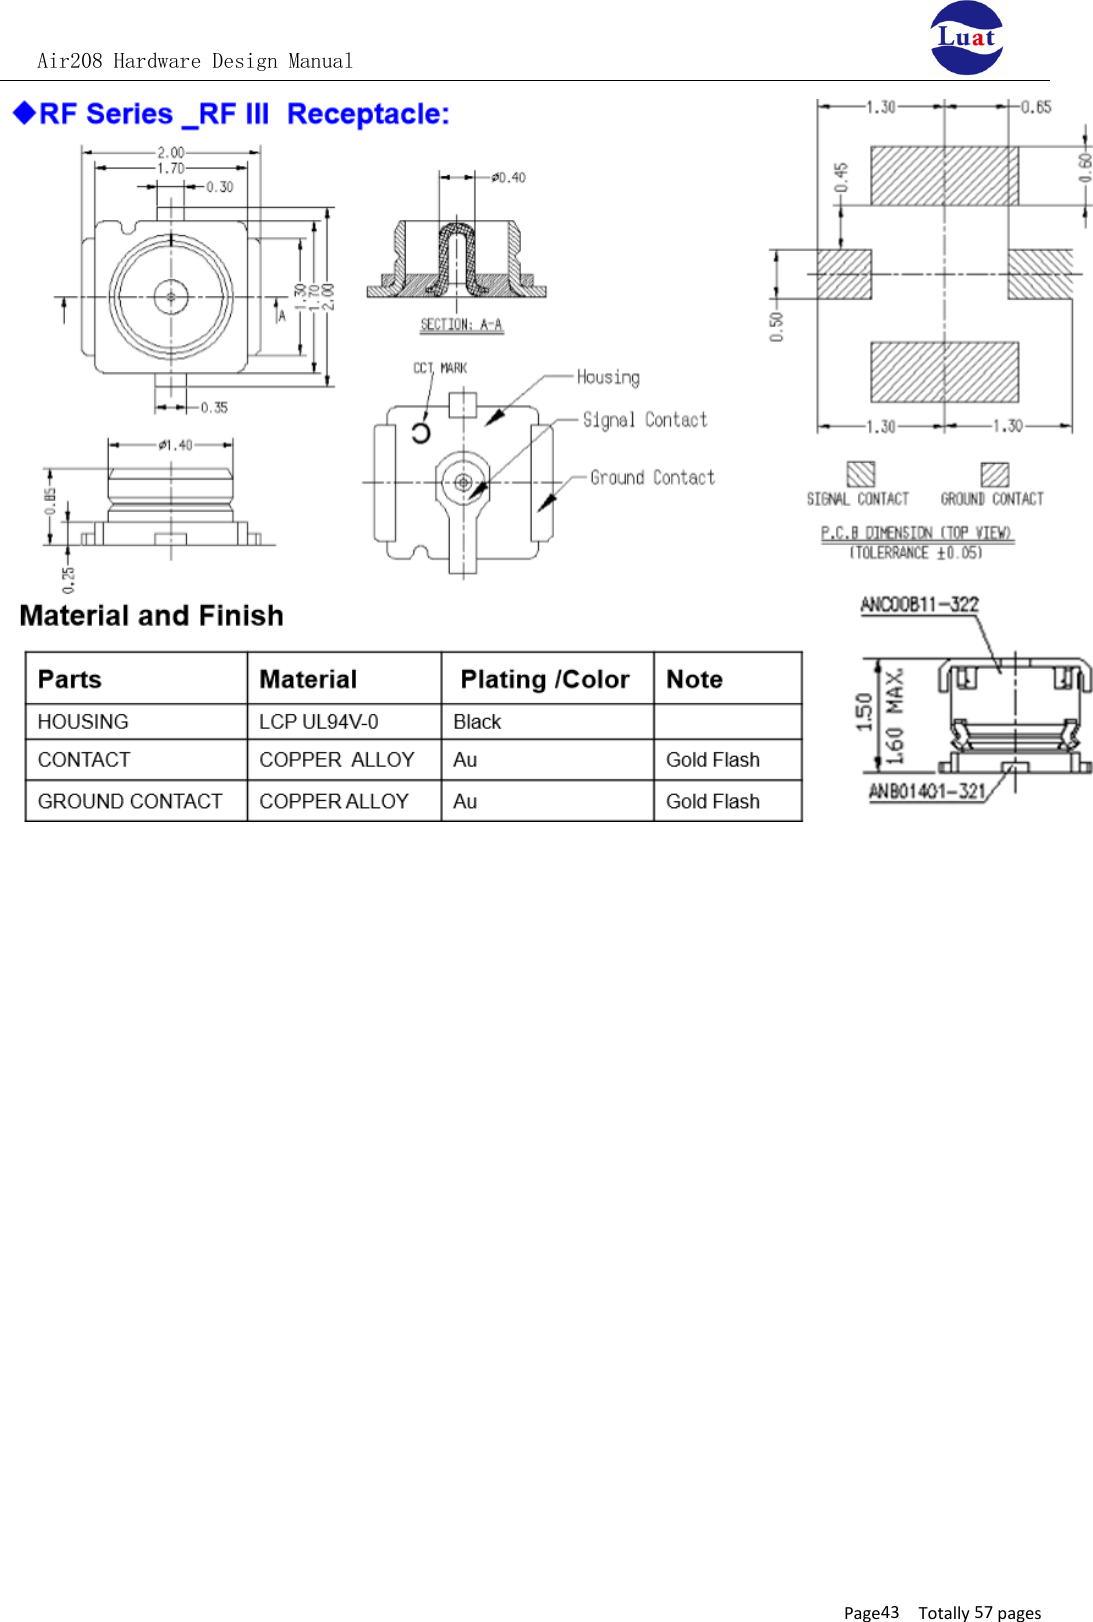 Air208 Hardware Design ManualPage43 Totally 57 pages